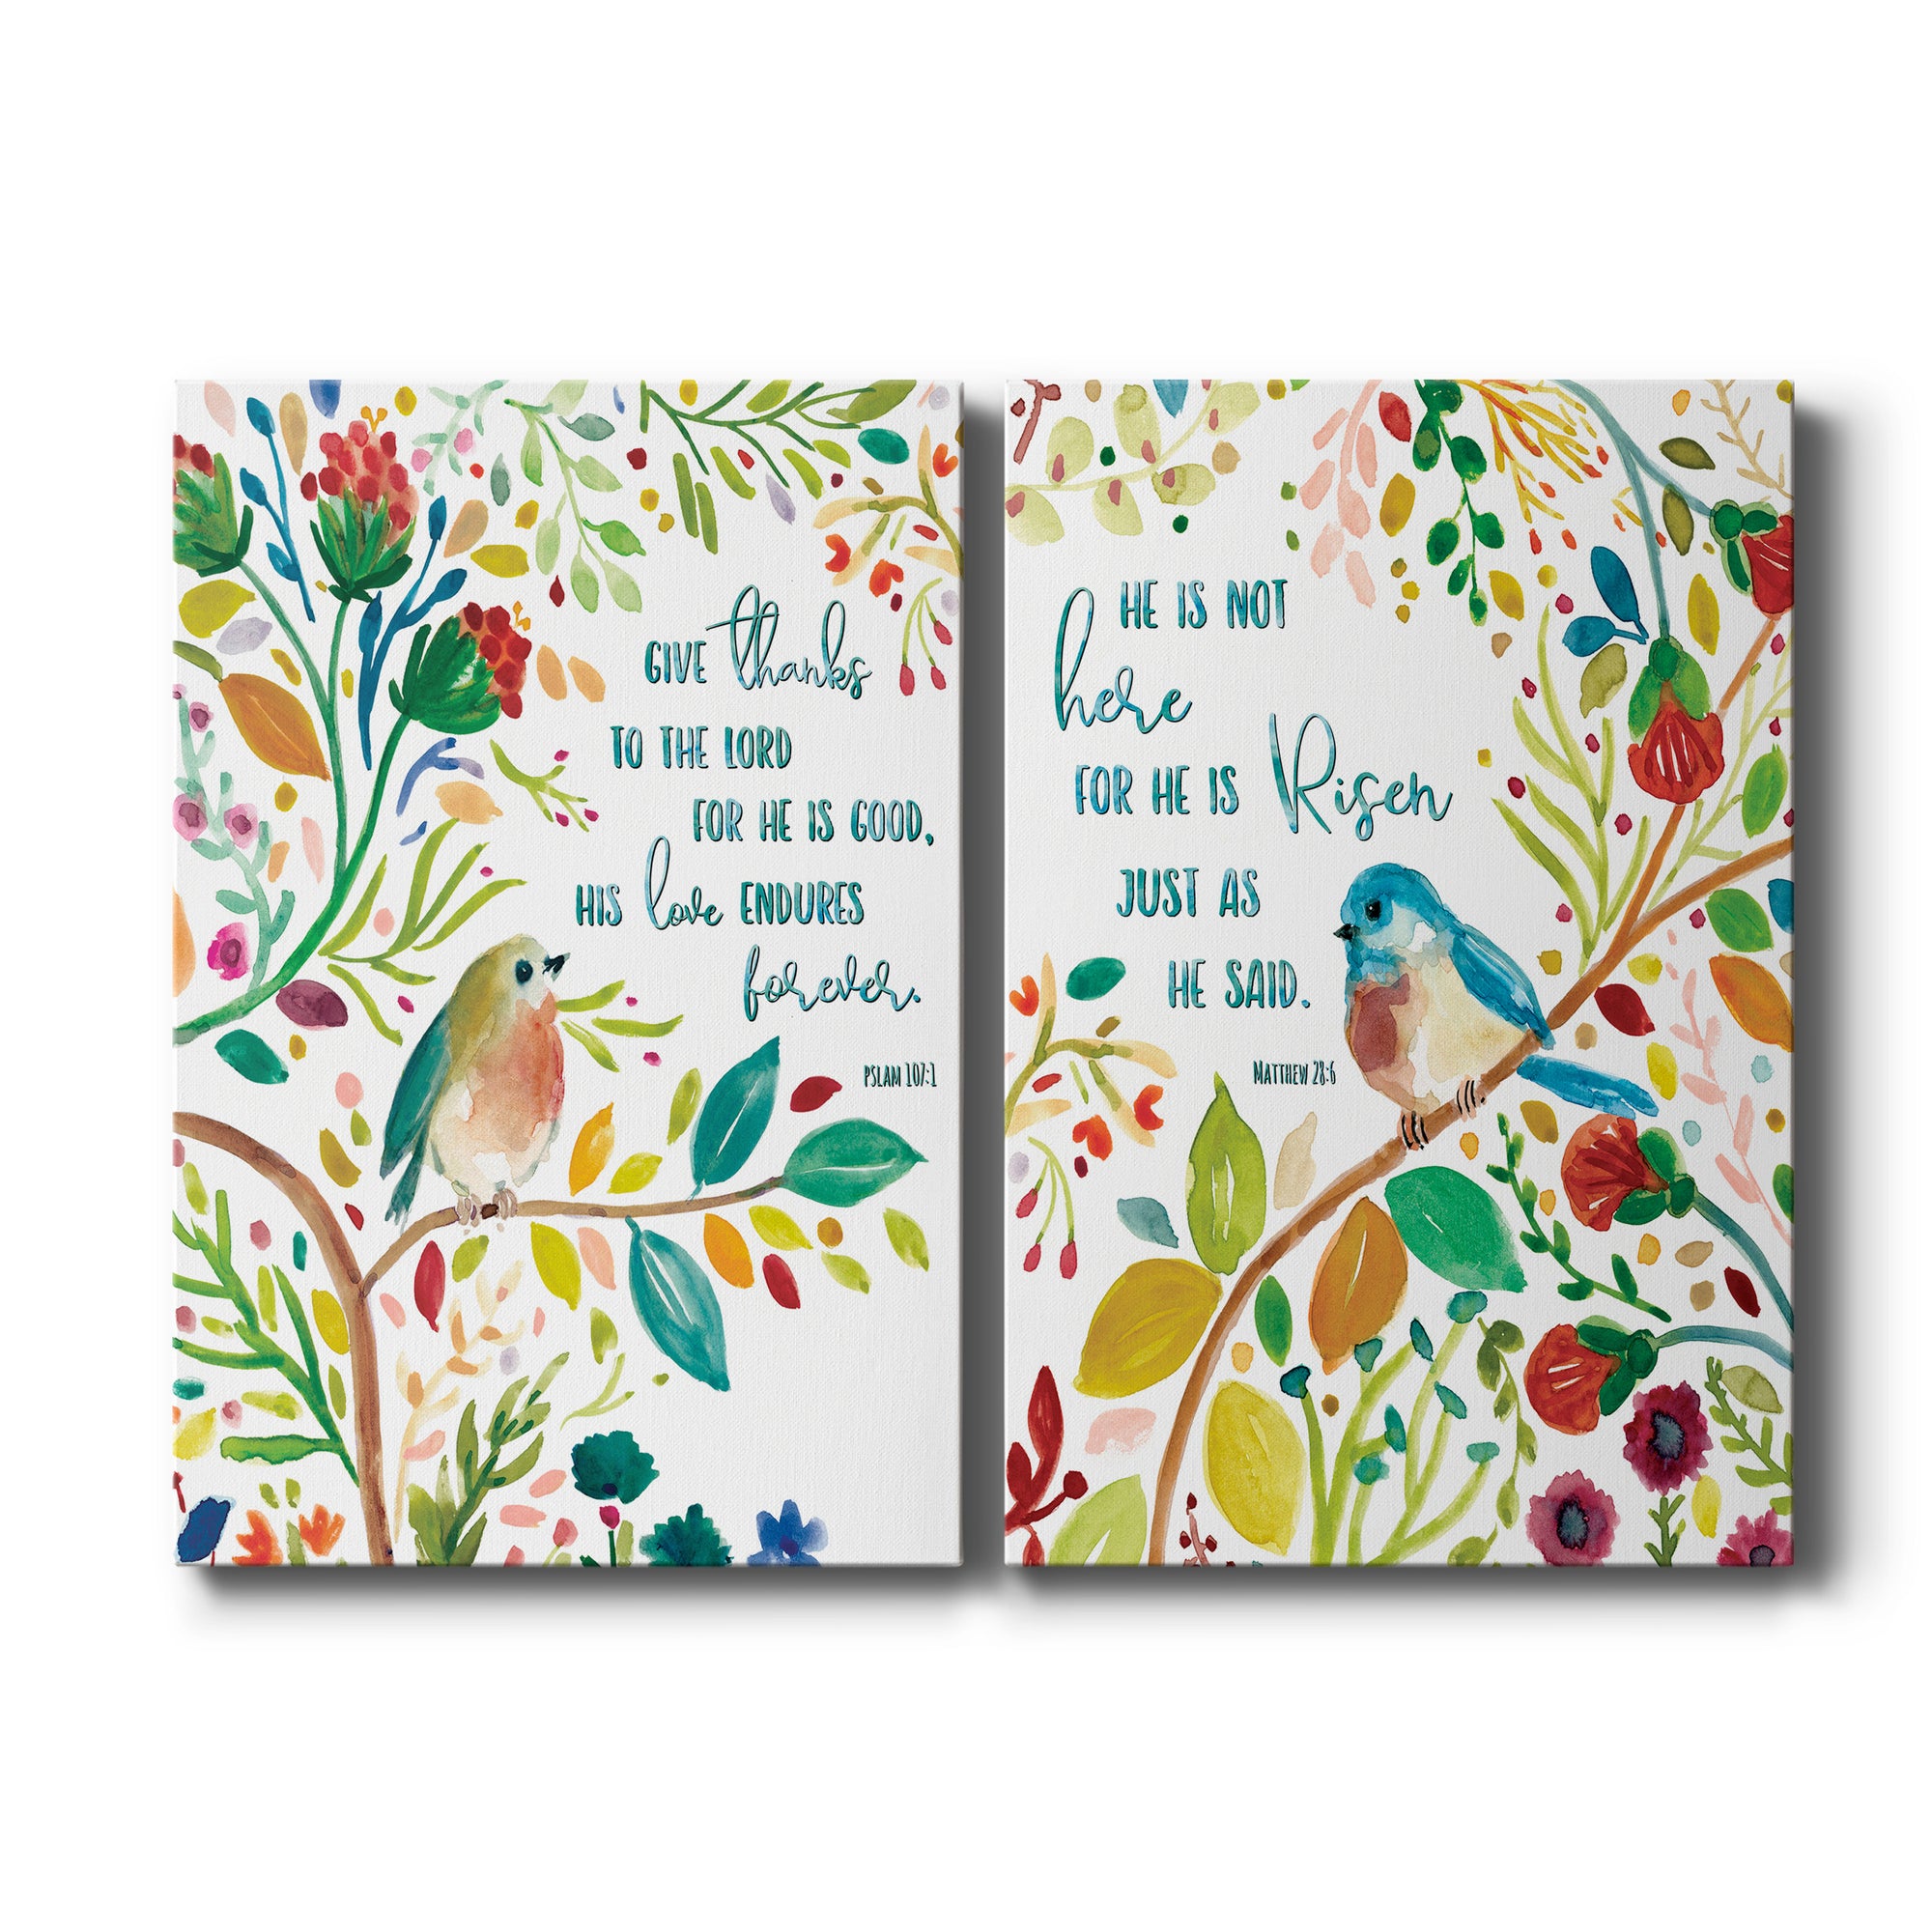 Give Thanks Premium Gallery Wrapped Canvas - Ready to Hang - Set of 2 - 8 x 12 Each